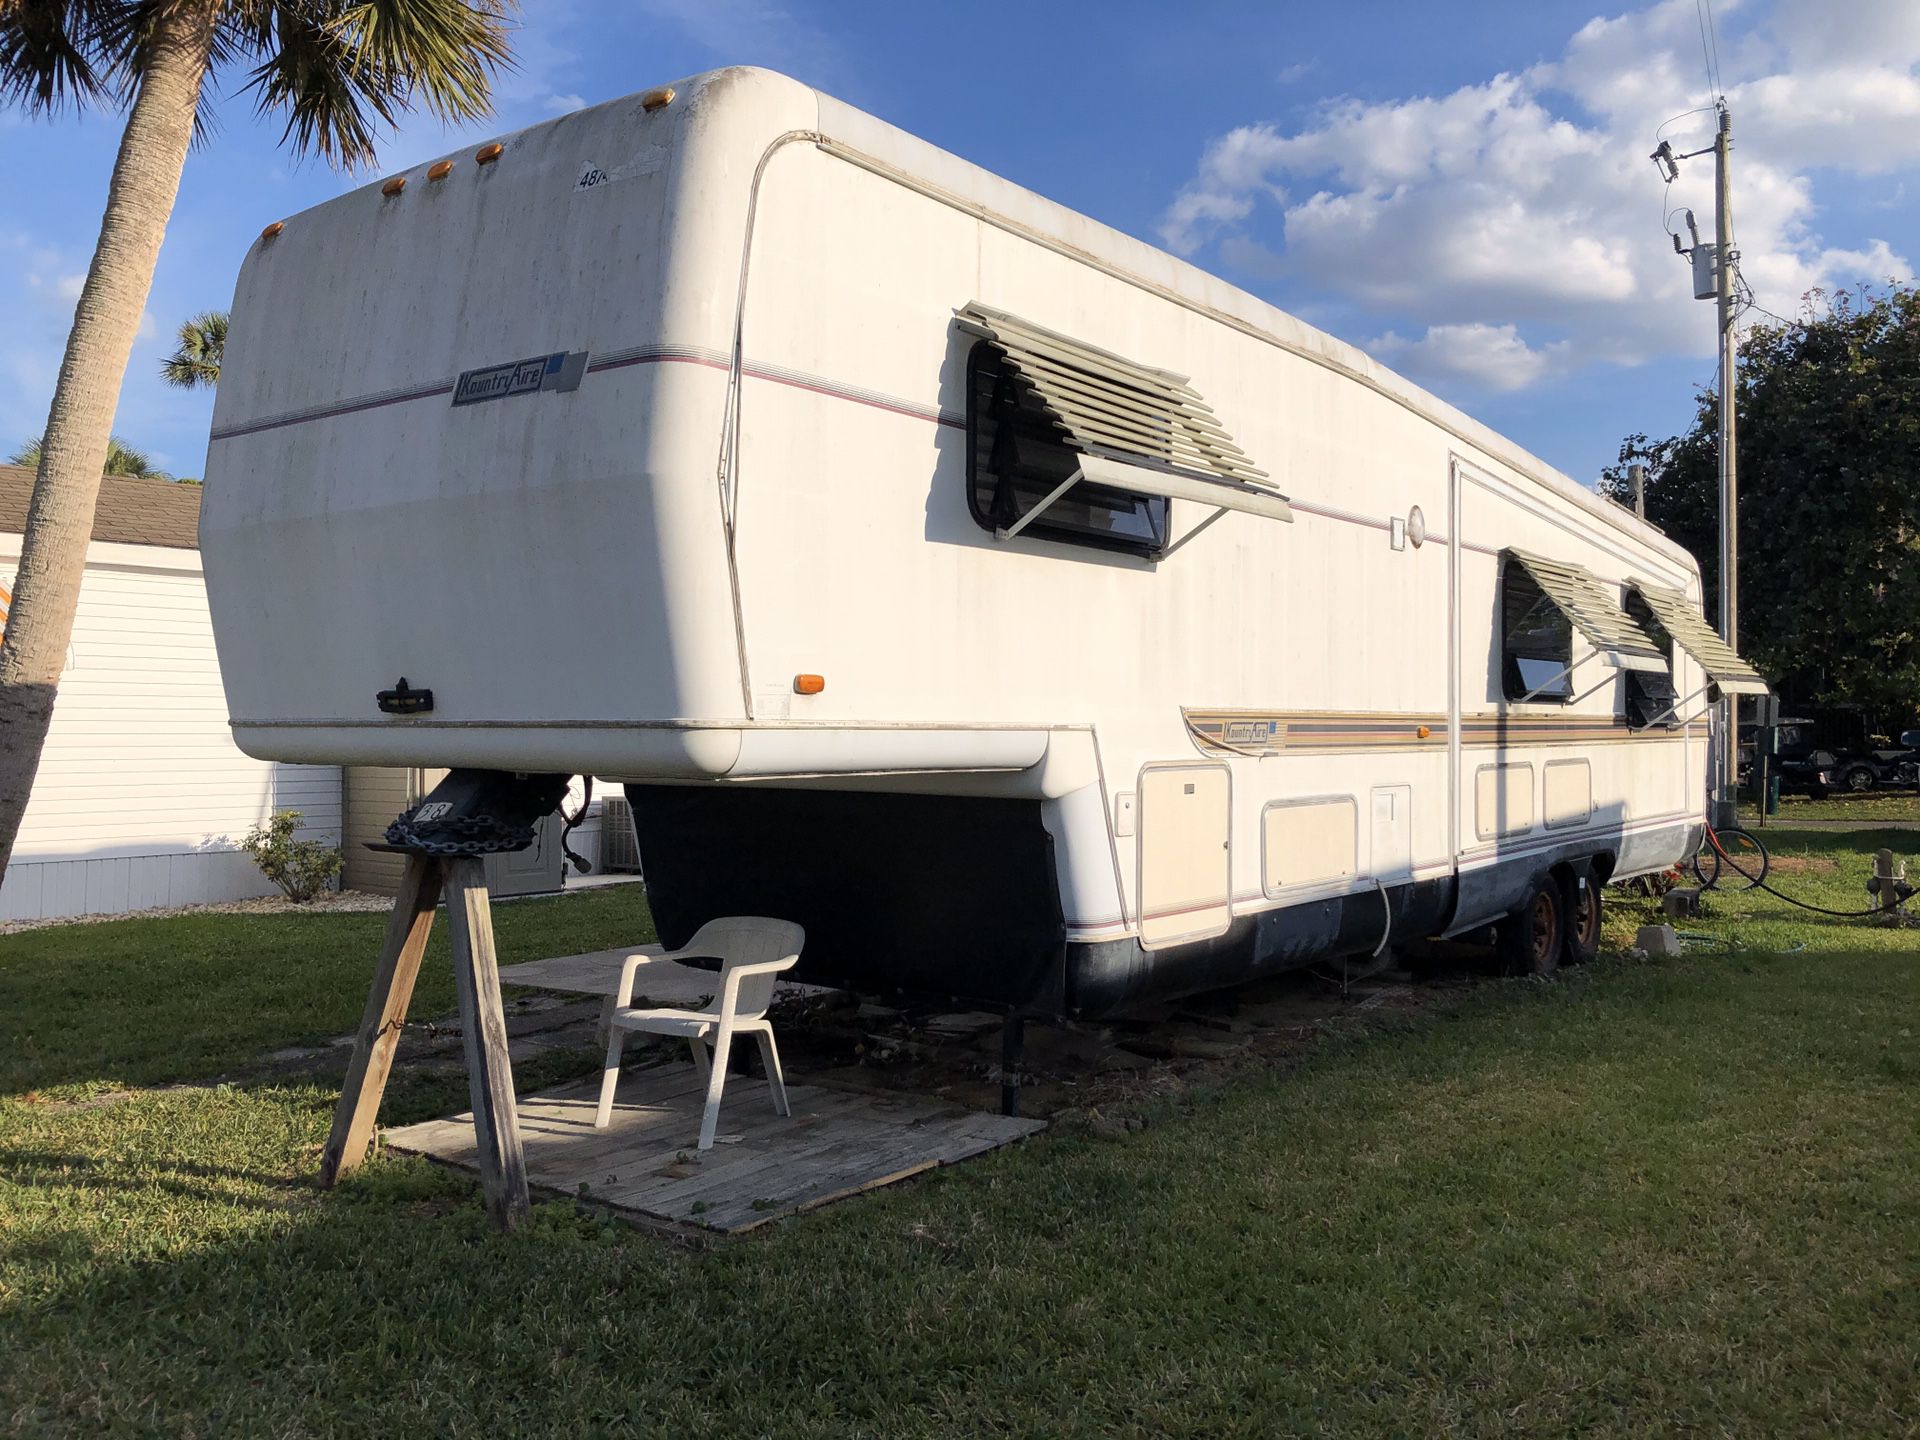 Trailer, RV, Recreational Vehicle for Sale